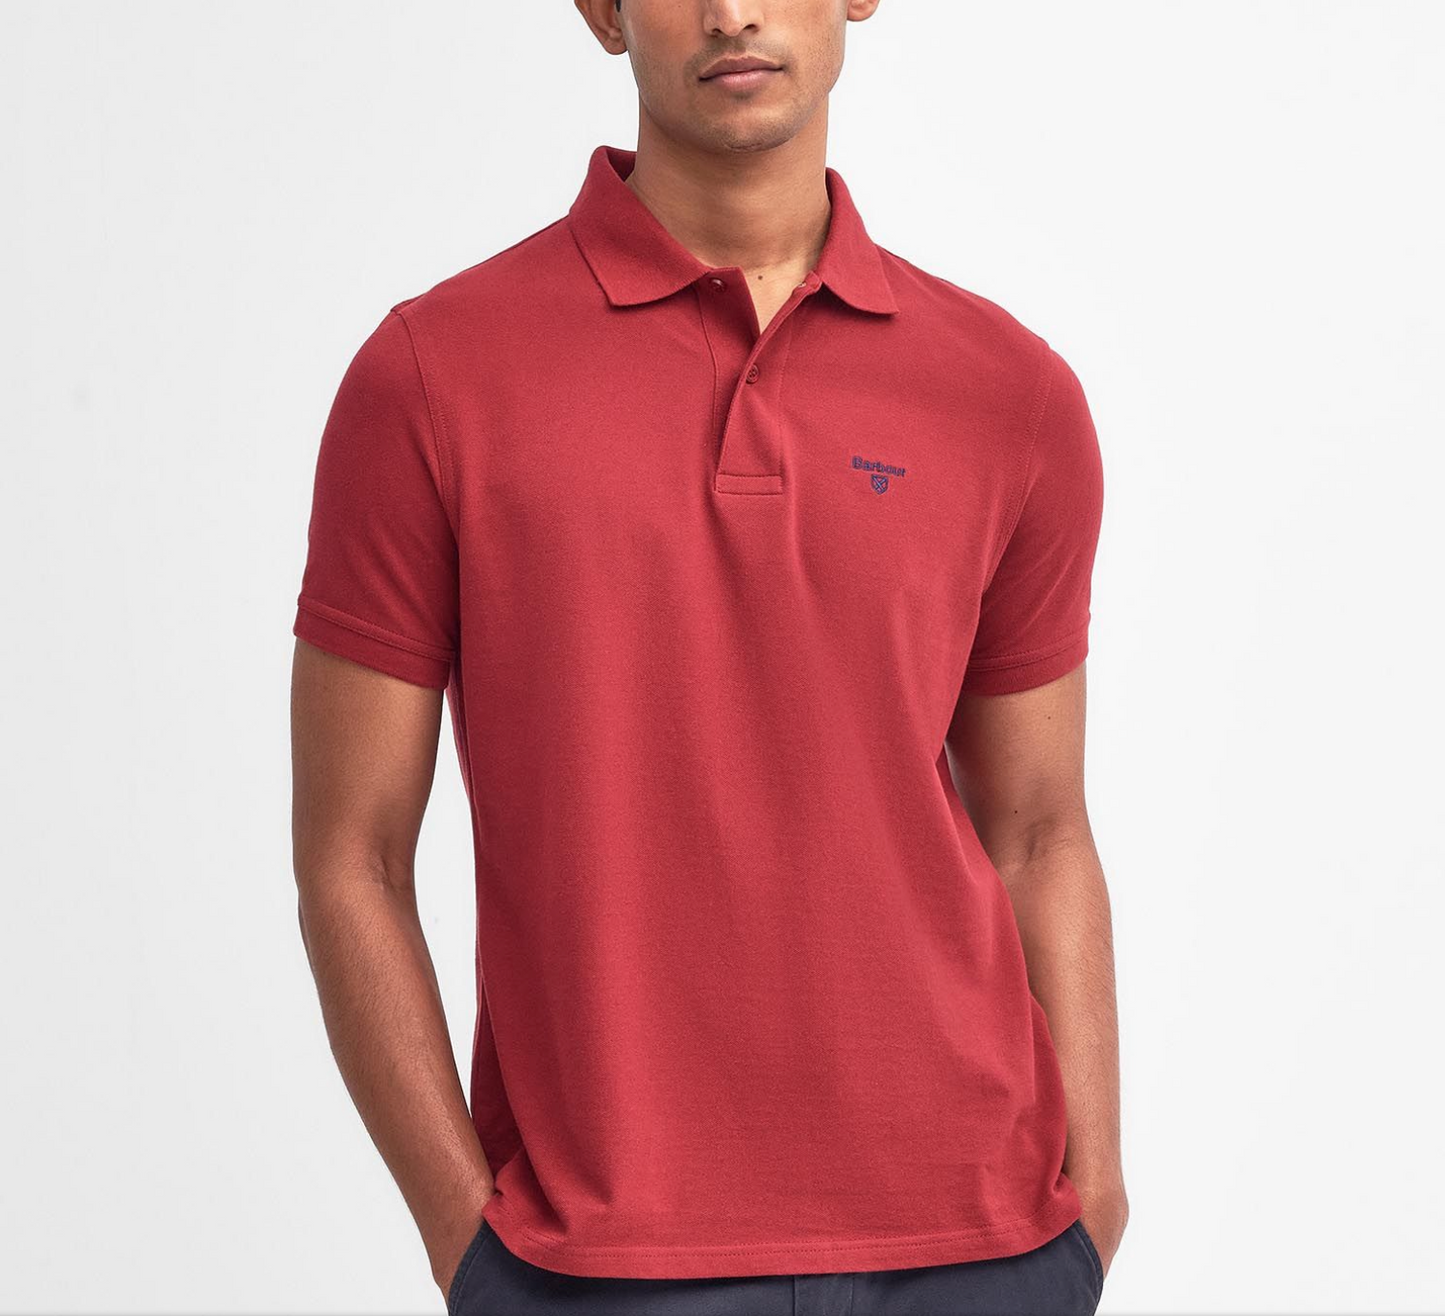 Barbour Lightwght Polo